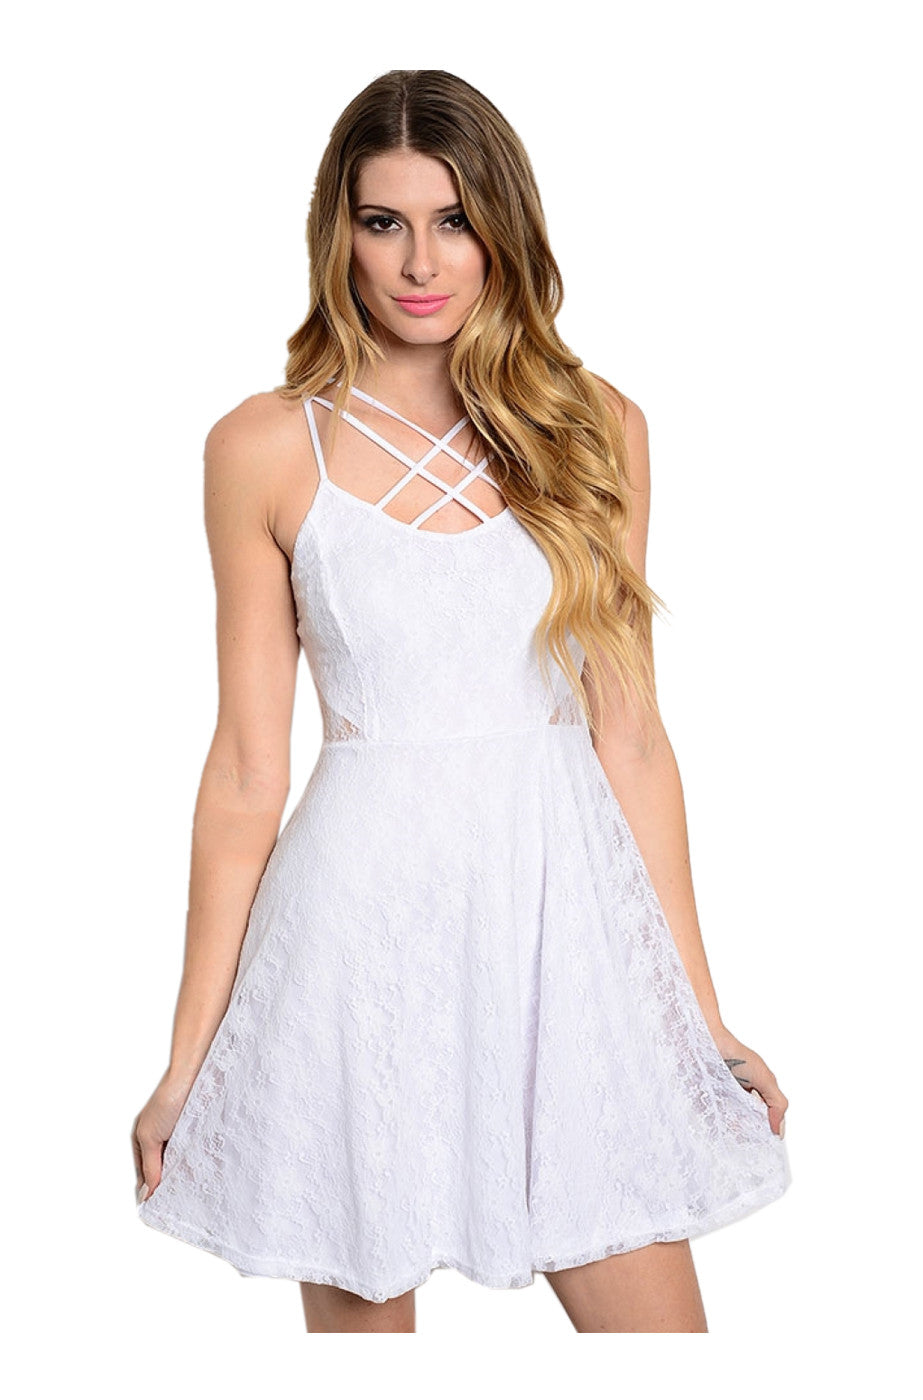 fit and flare cocktail dress white